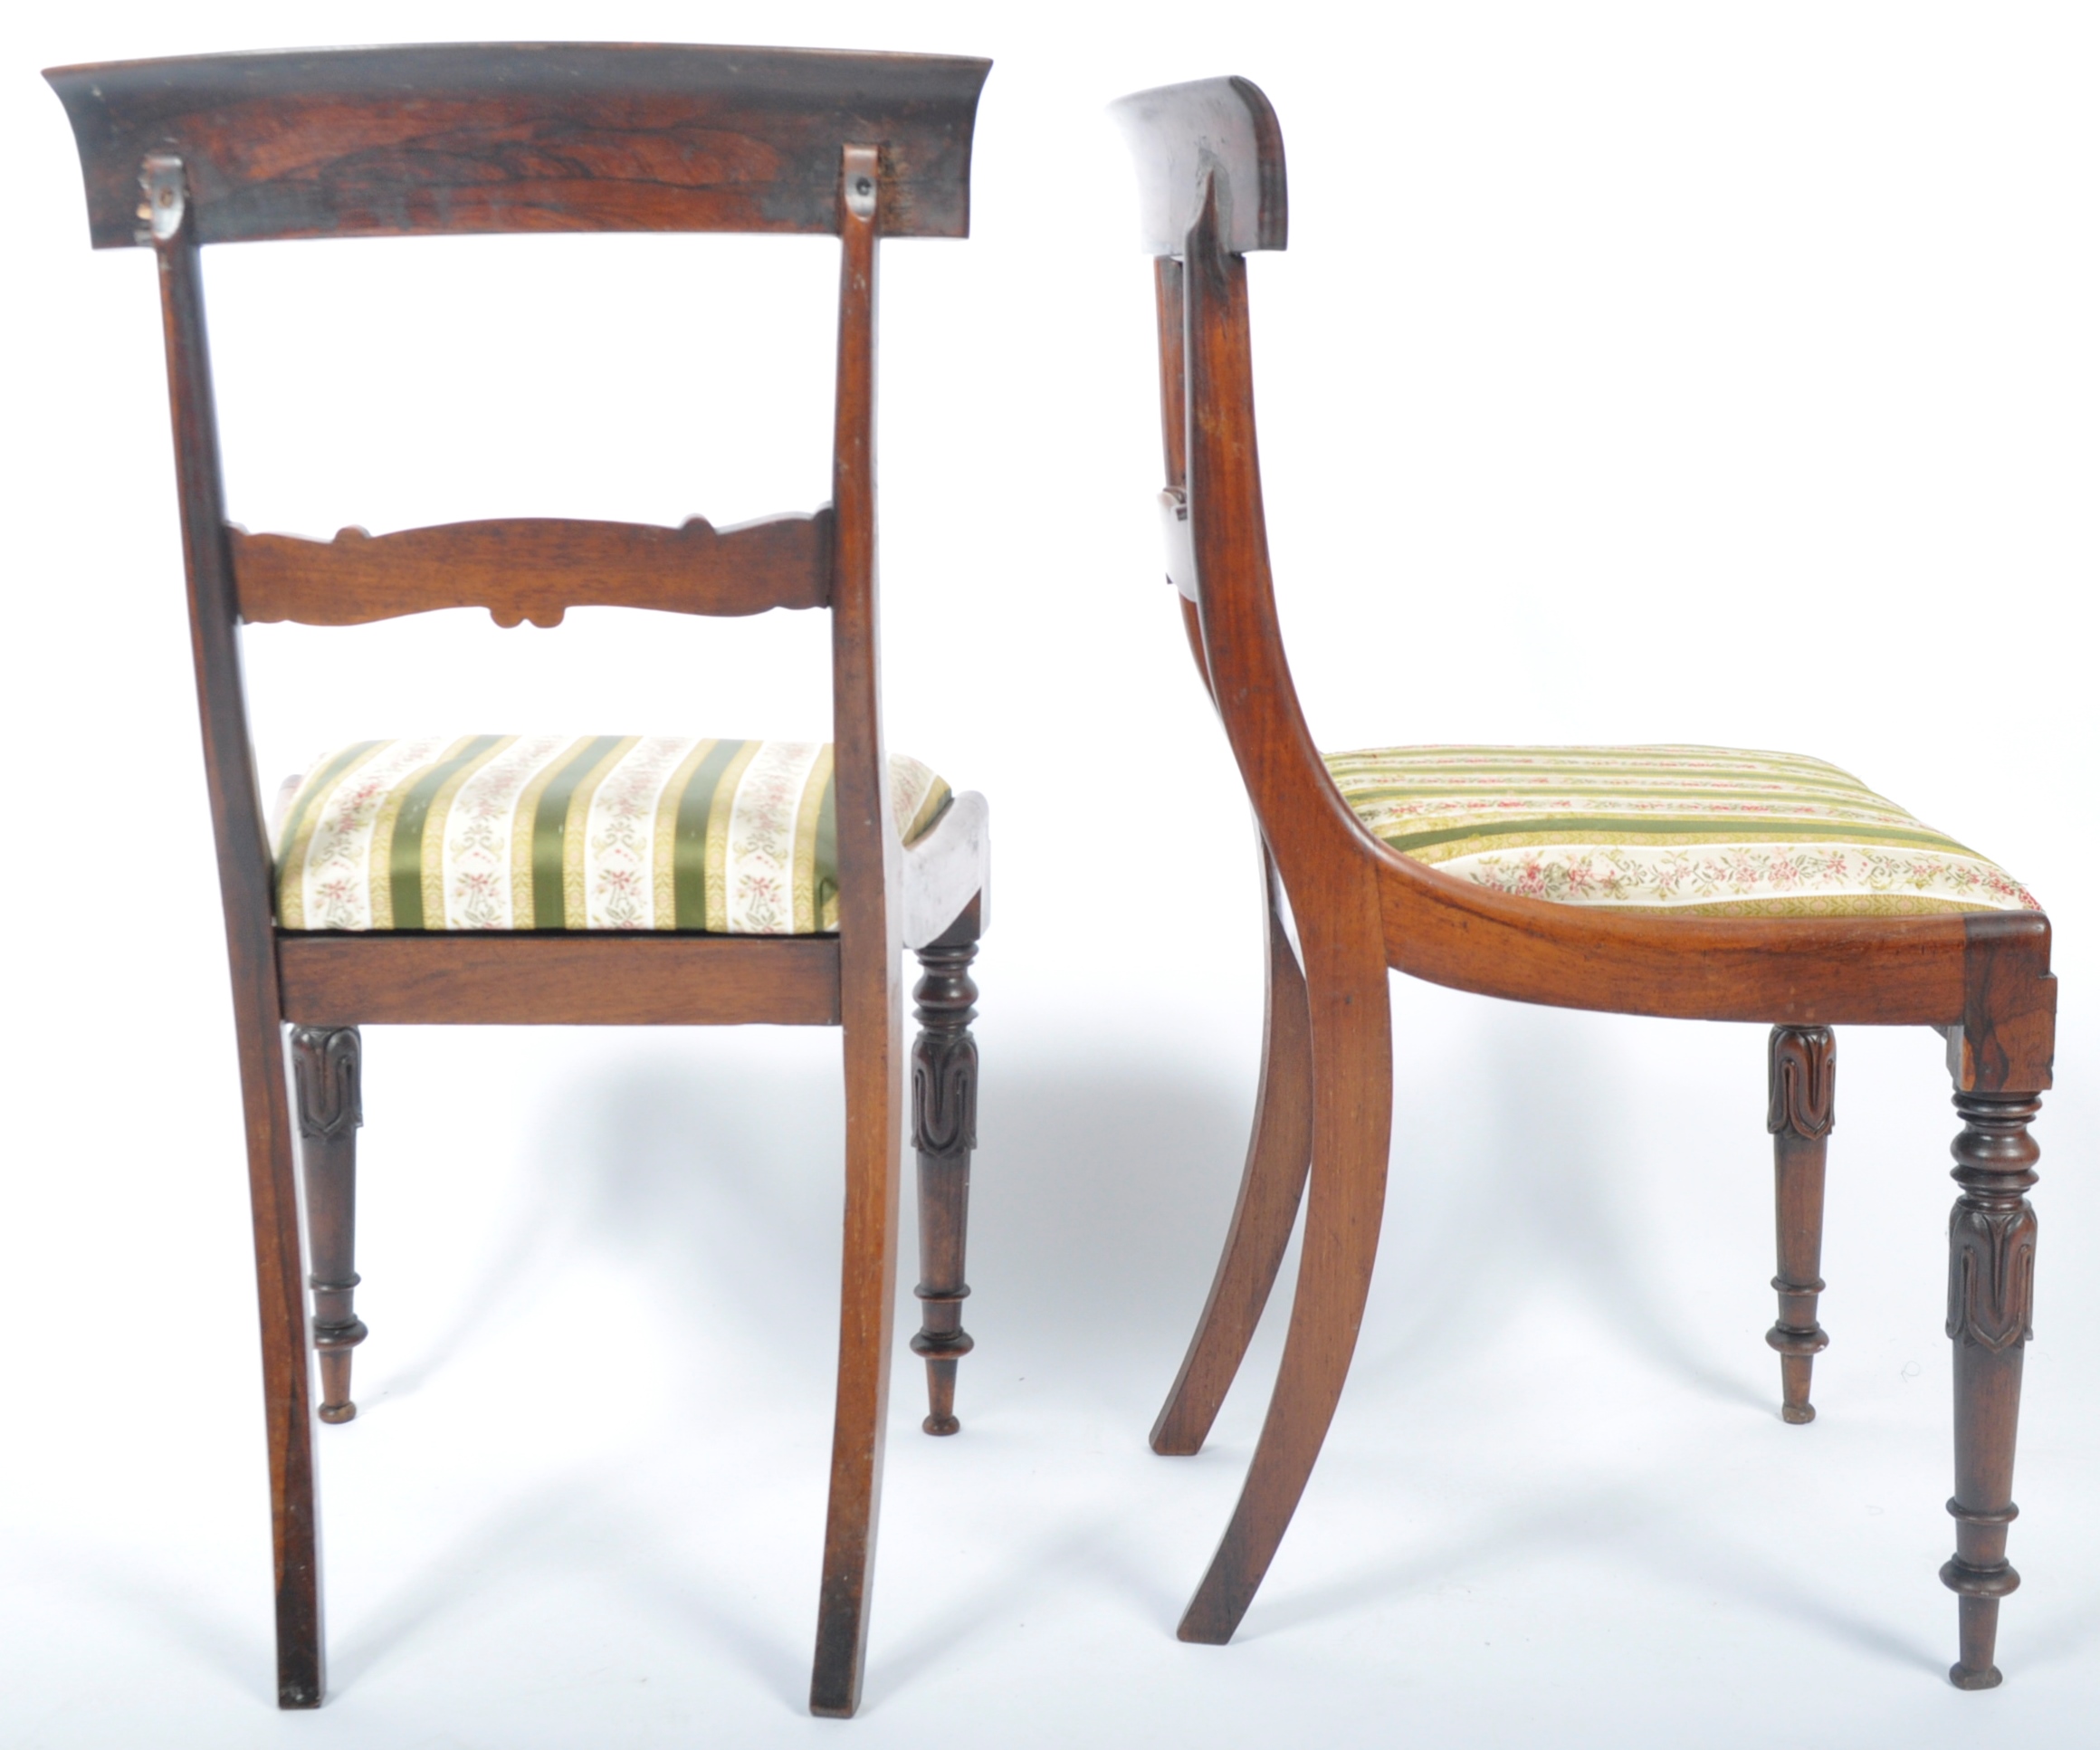 SIX 19TH CENTURY ROSEWOOD DINING CHAIRS IN THE GILLOWS MANNER - Image 10 of 11